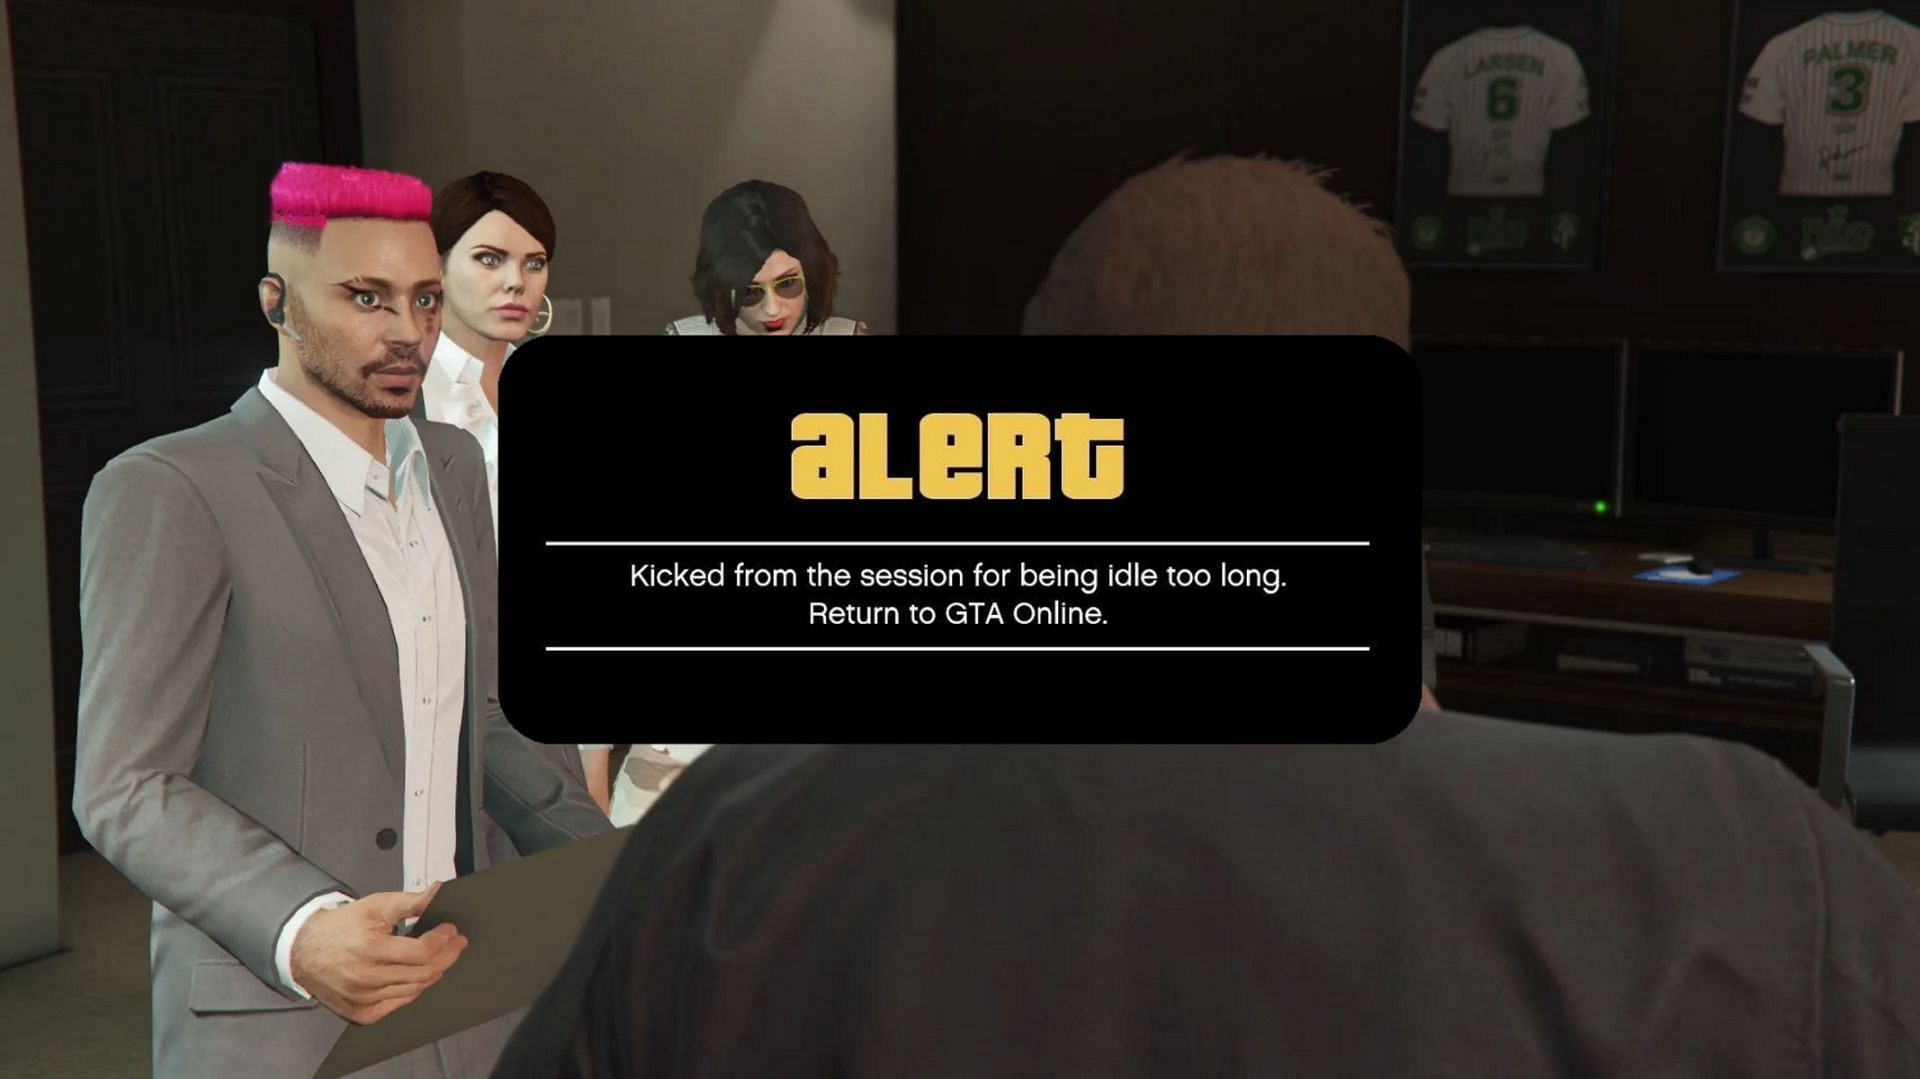 GTA Online players tend to hate seeing this message (Image via Rockstar Games, u/Lylla_Protogen)